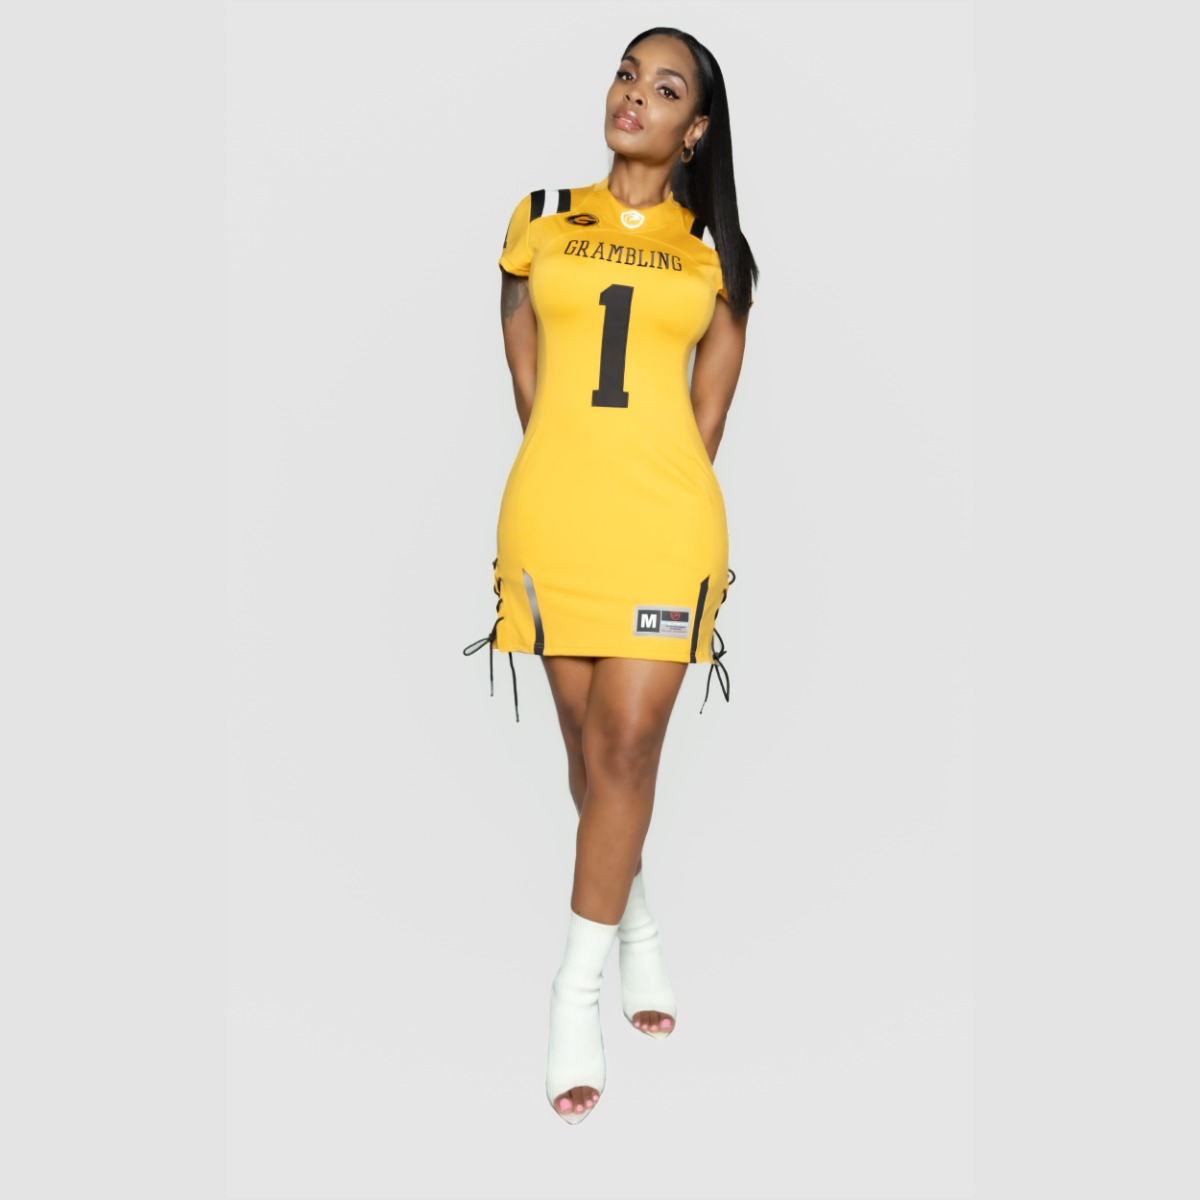 Grambling Authentic Collegiate Jersey Dress -Gold-X-Small